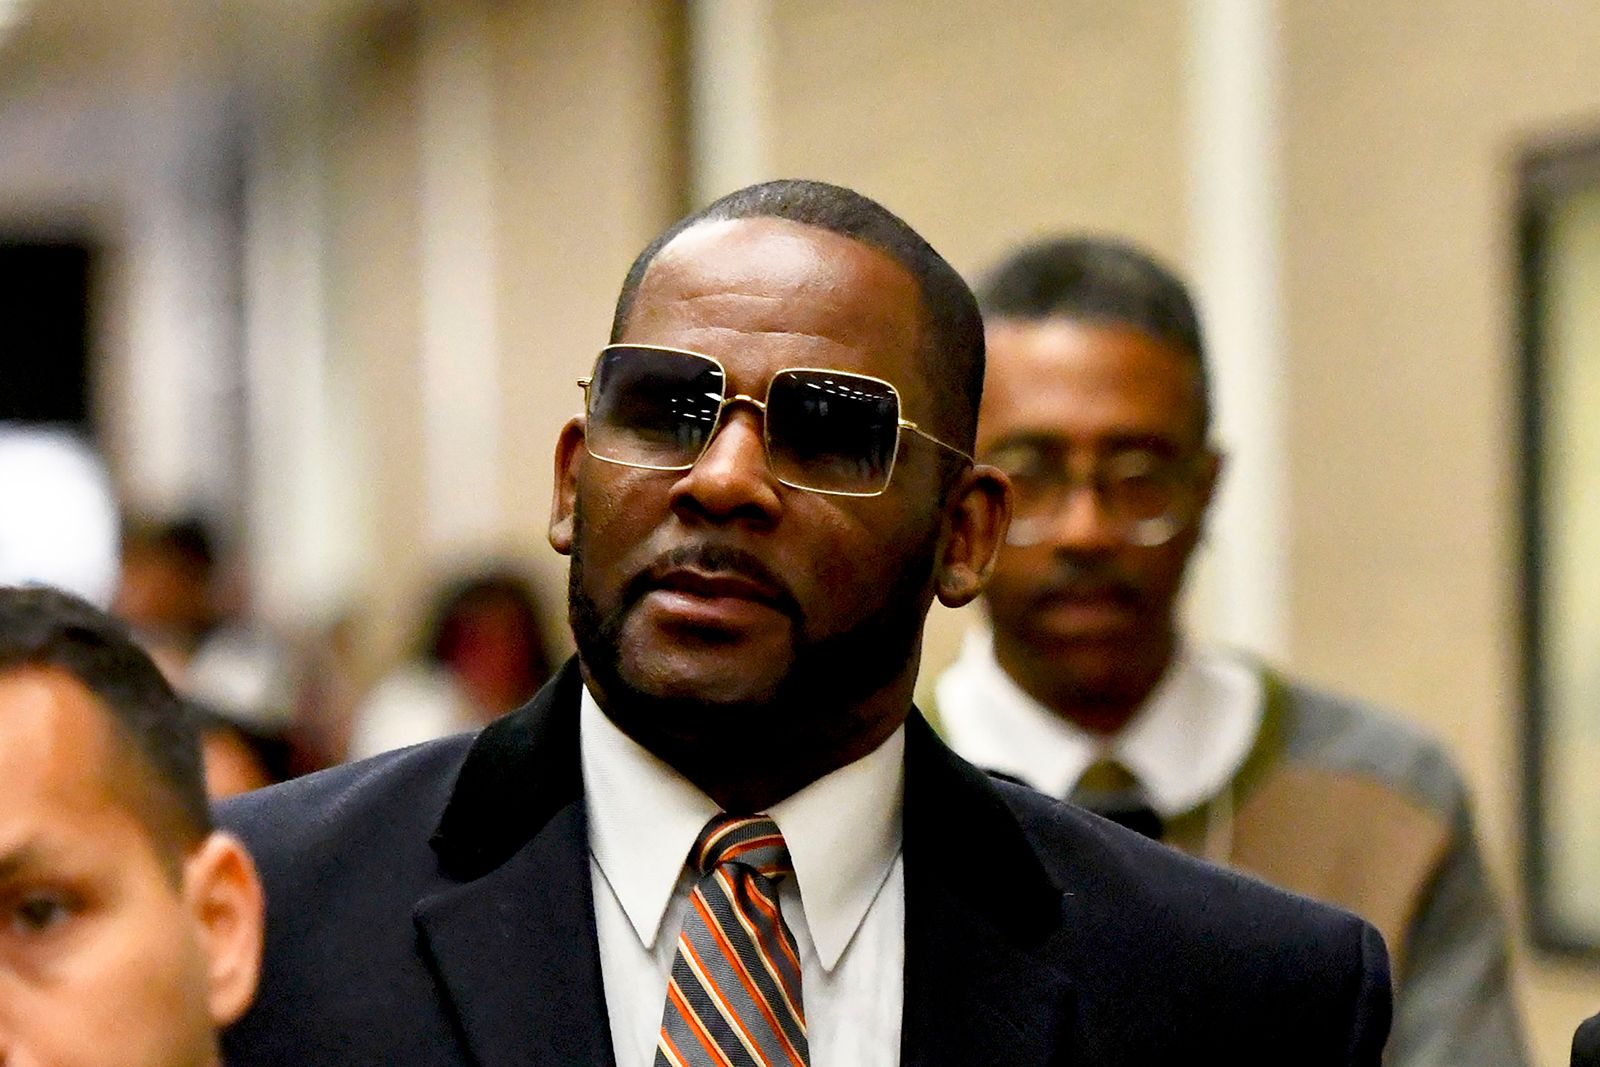 Chicago prosecutor to drop sex-abuse charges against R Kelly